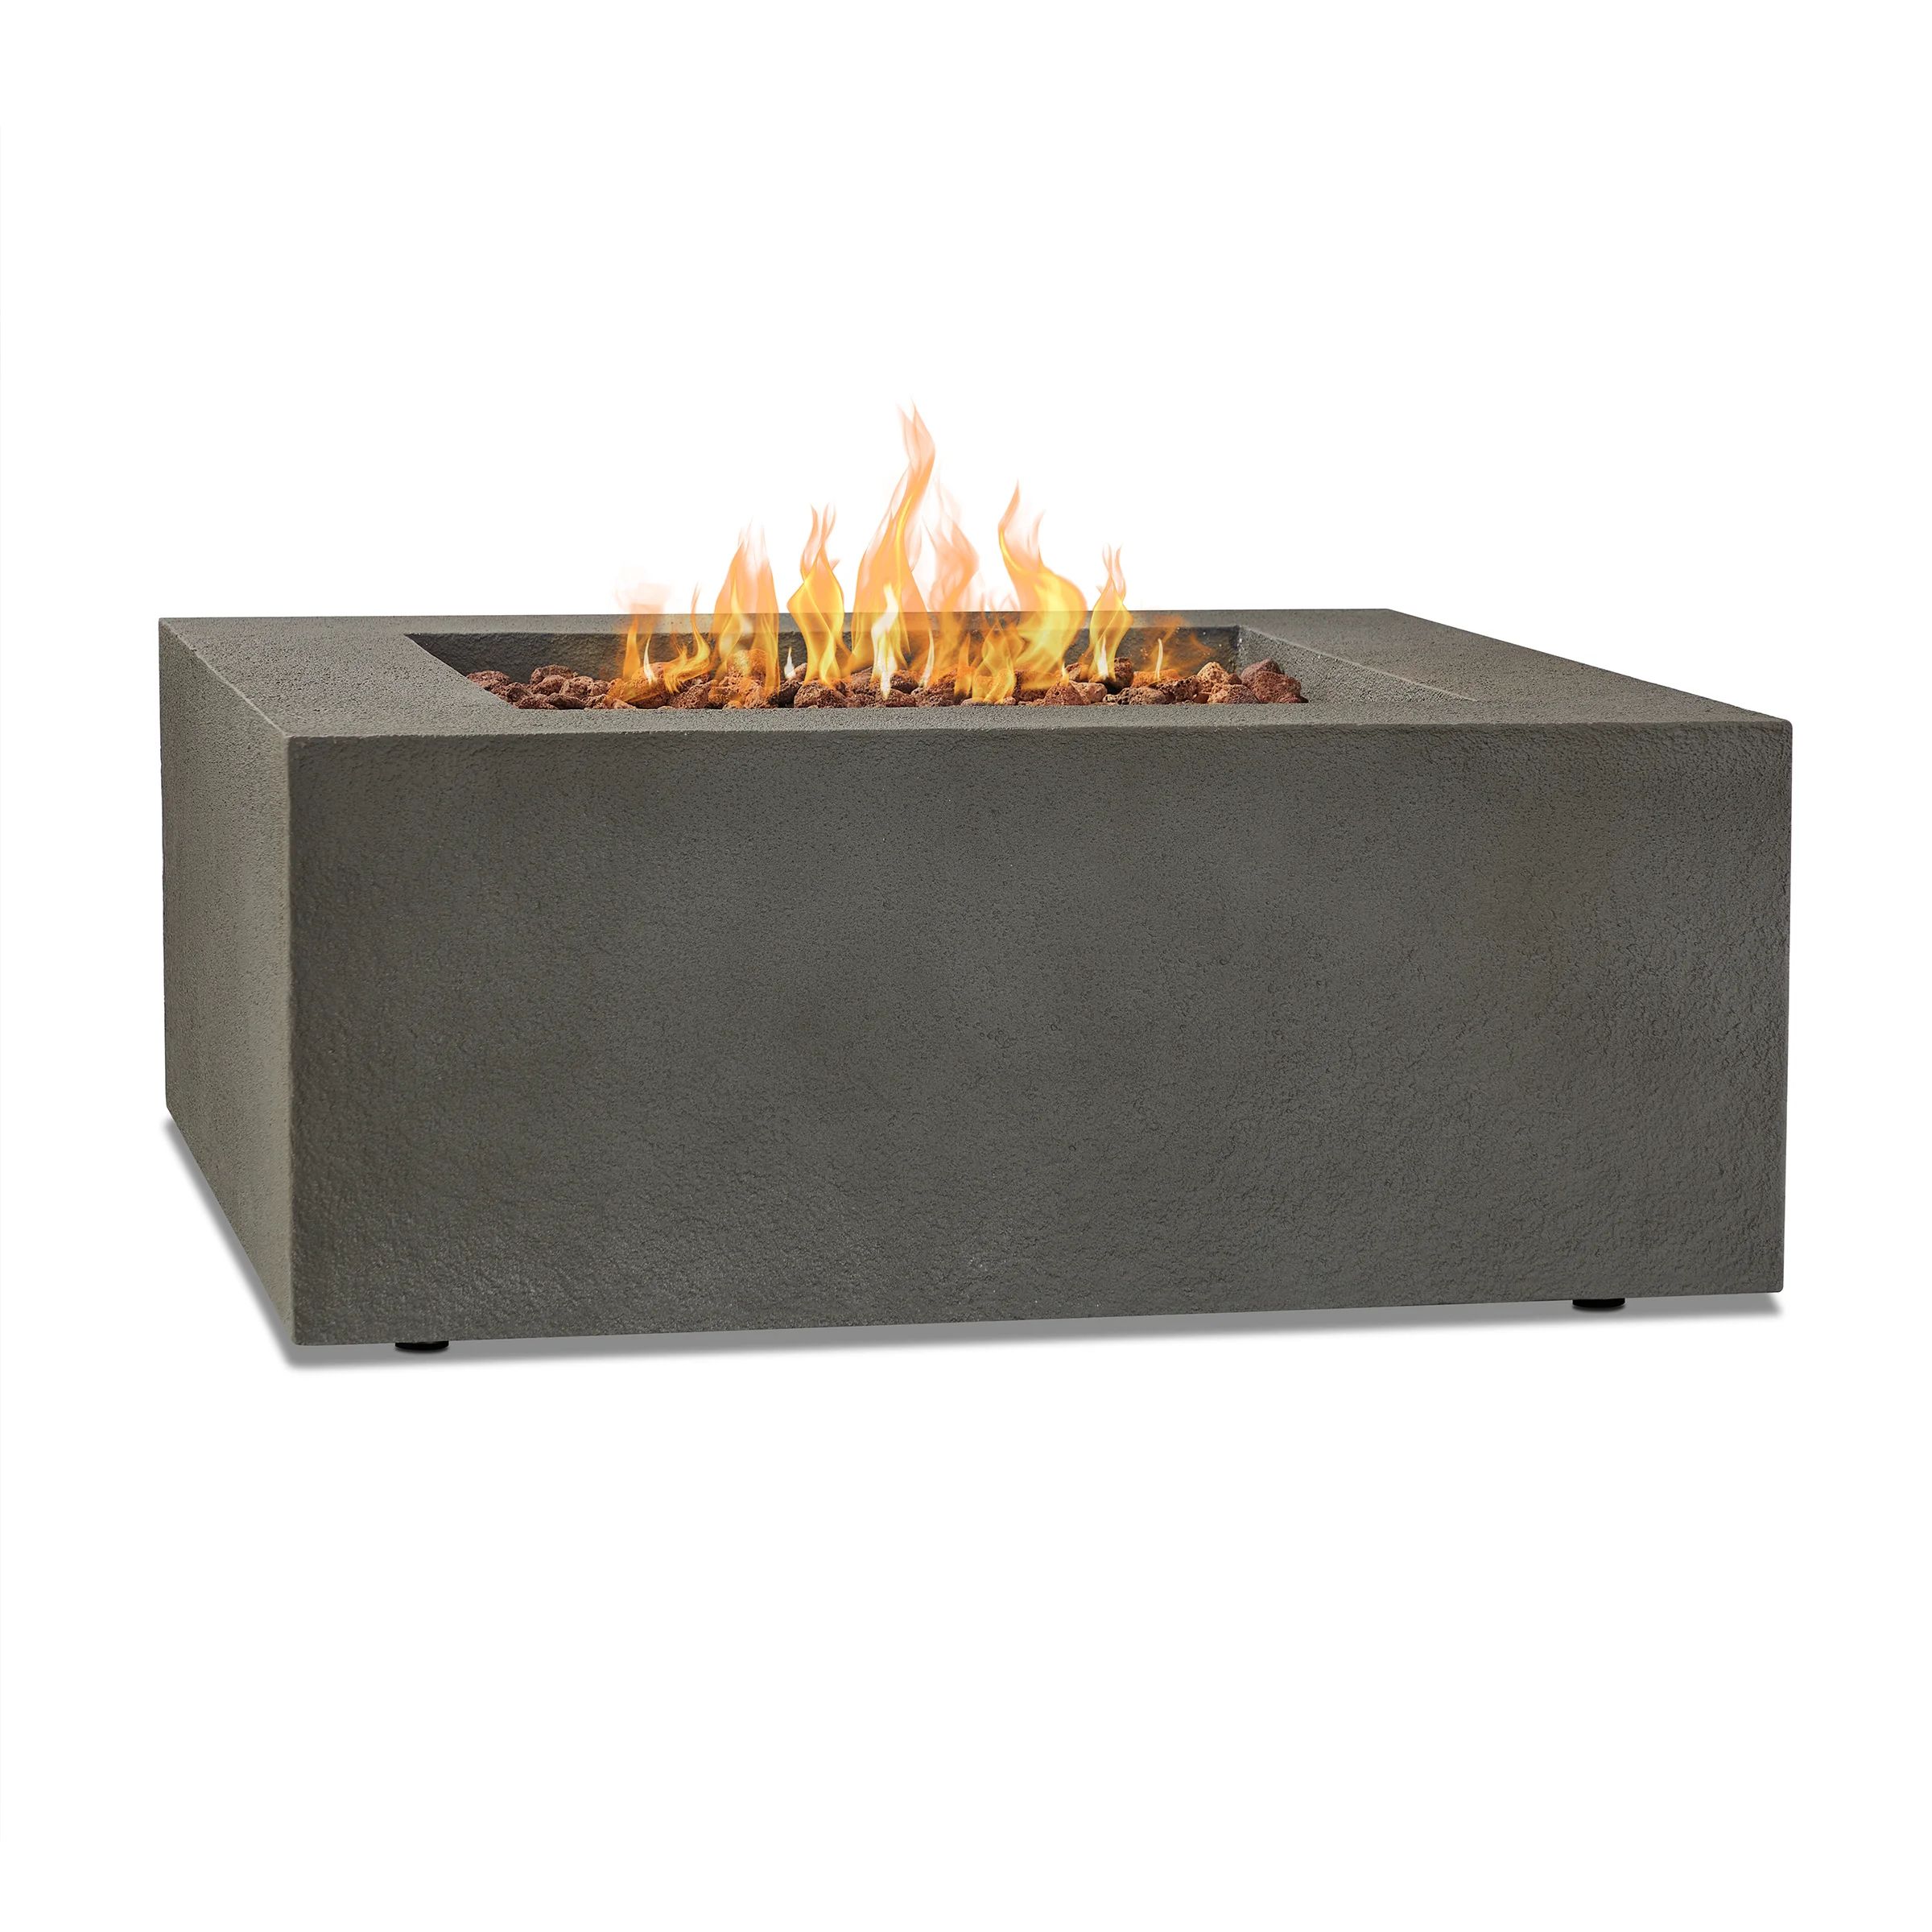 BALTIC Concrete Fire Pit Table with Lid | Wayfair North America